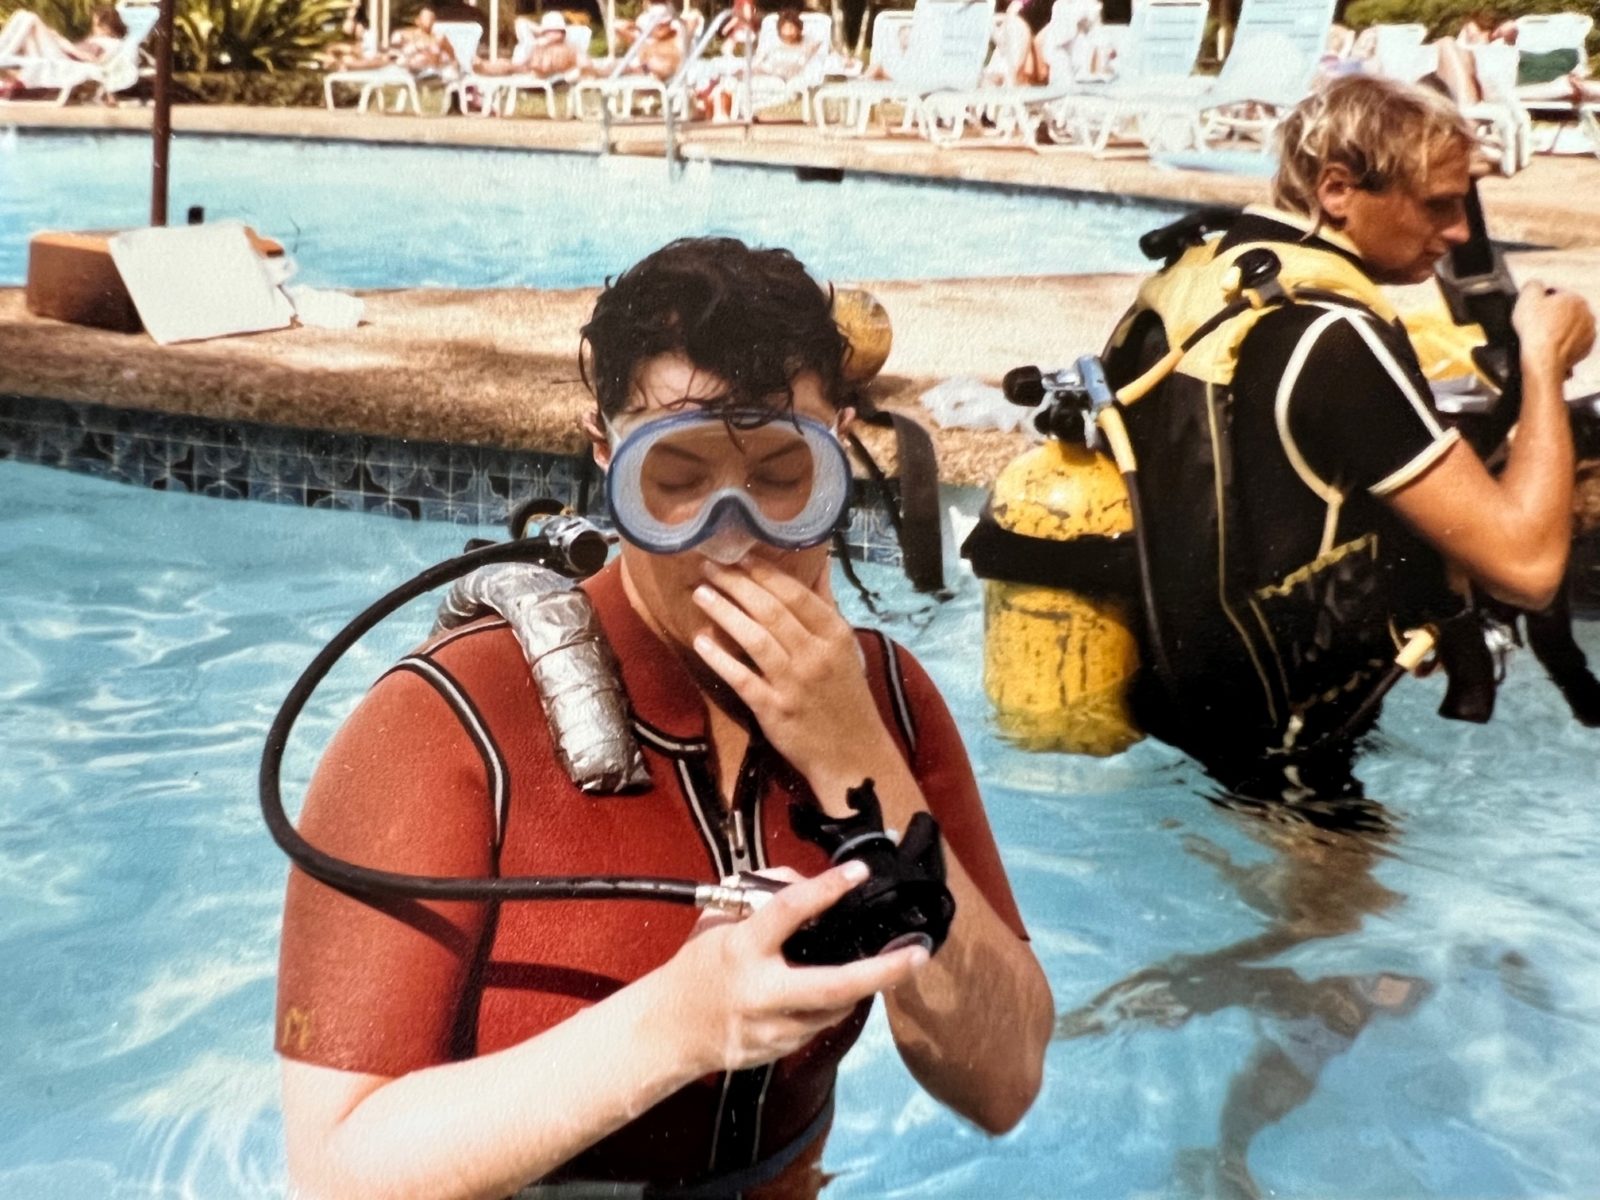 Vicki learning to explore the other world underwater. Her first scuba diving experience in 1991.